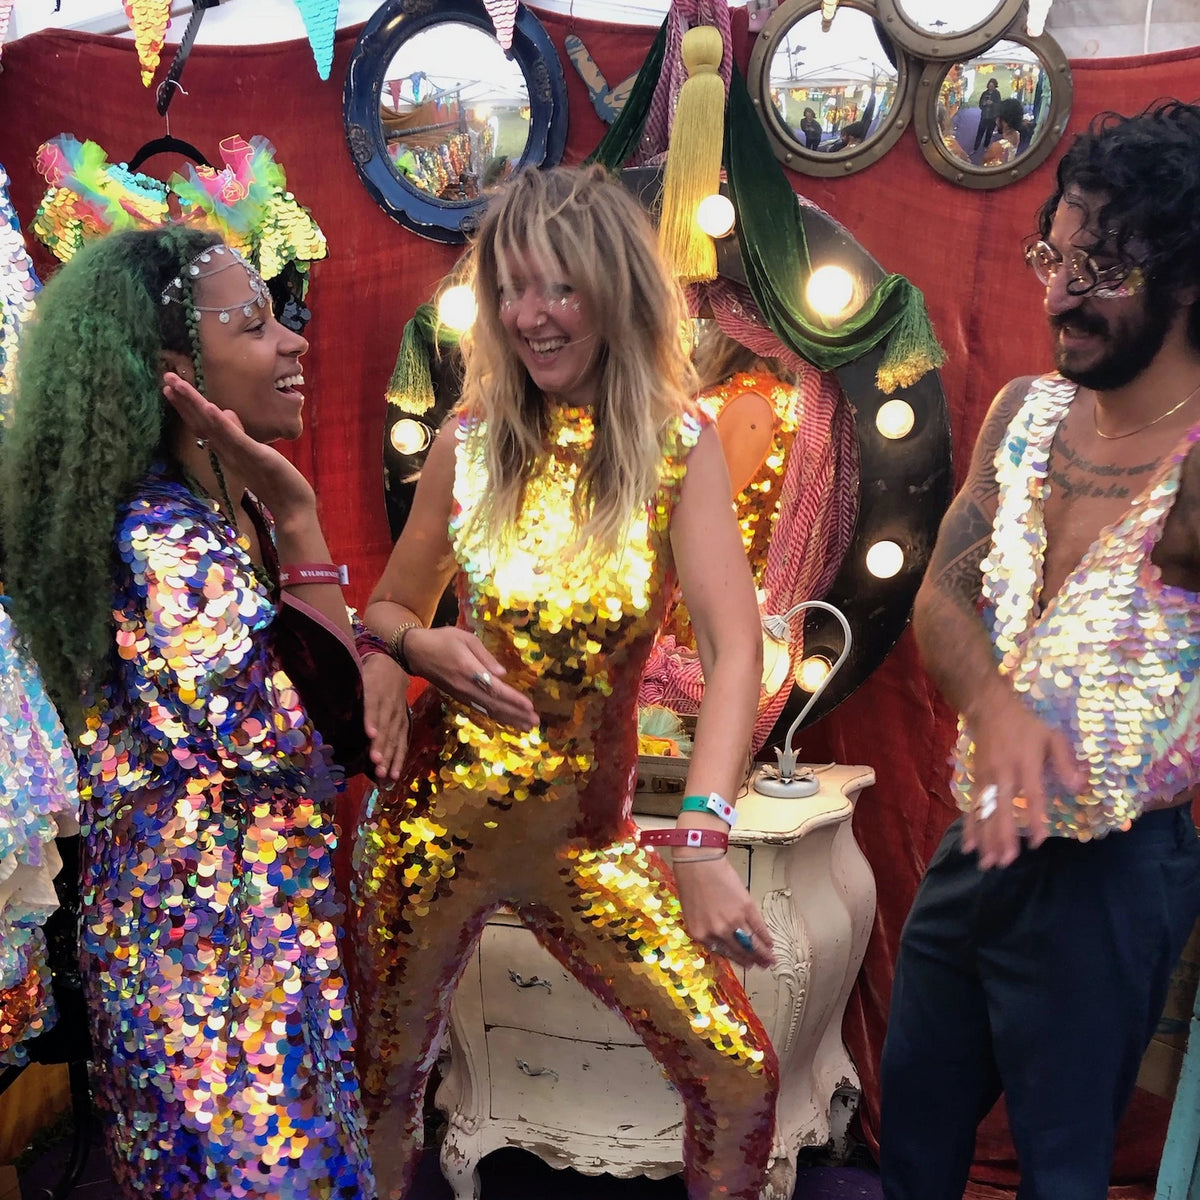 Three members of staff at the Rosa Bloom fesitival pop up shop dance together while wearing bright sequin outfits.